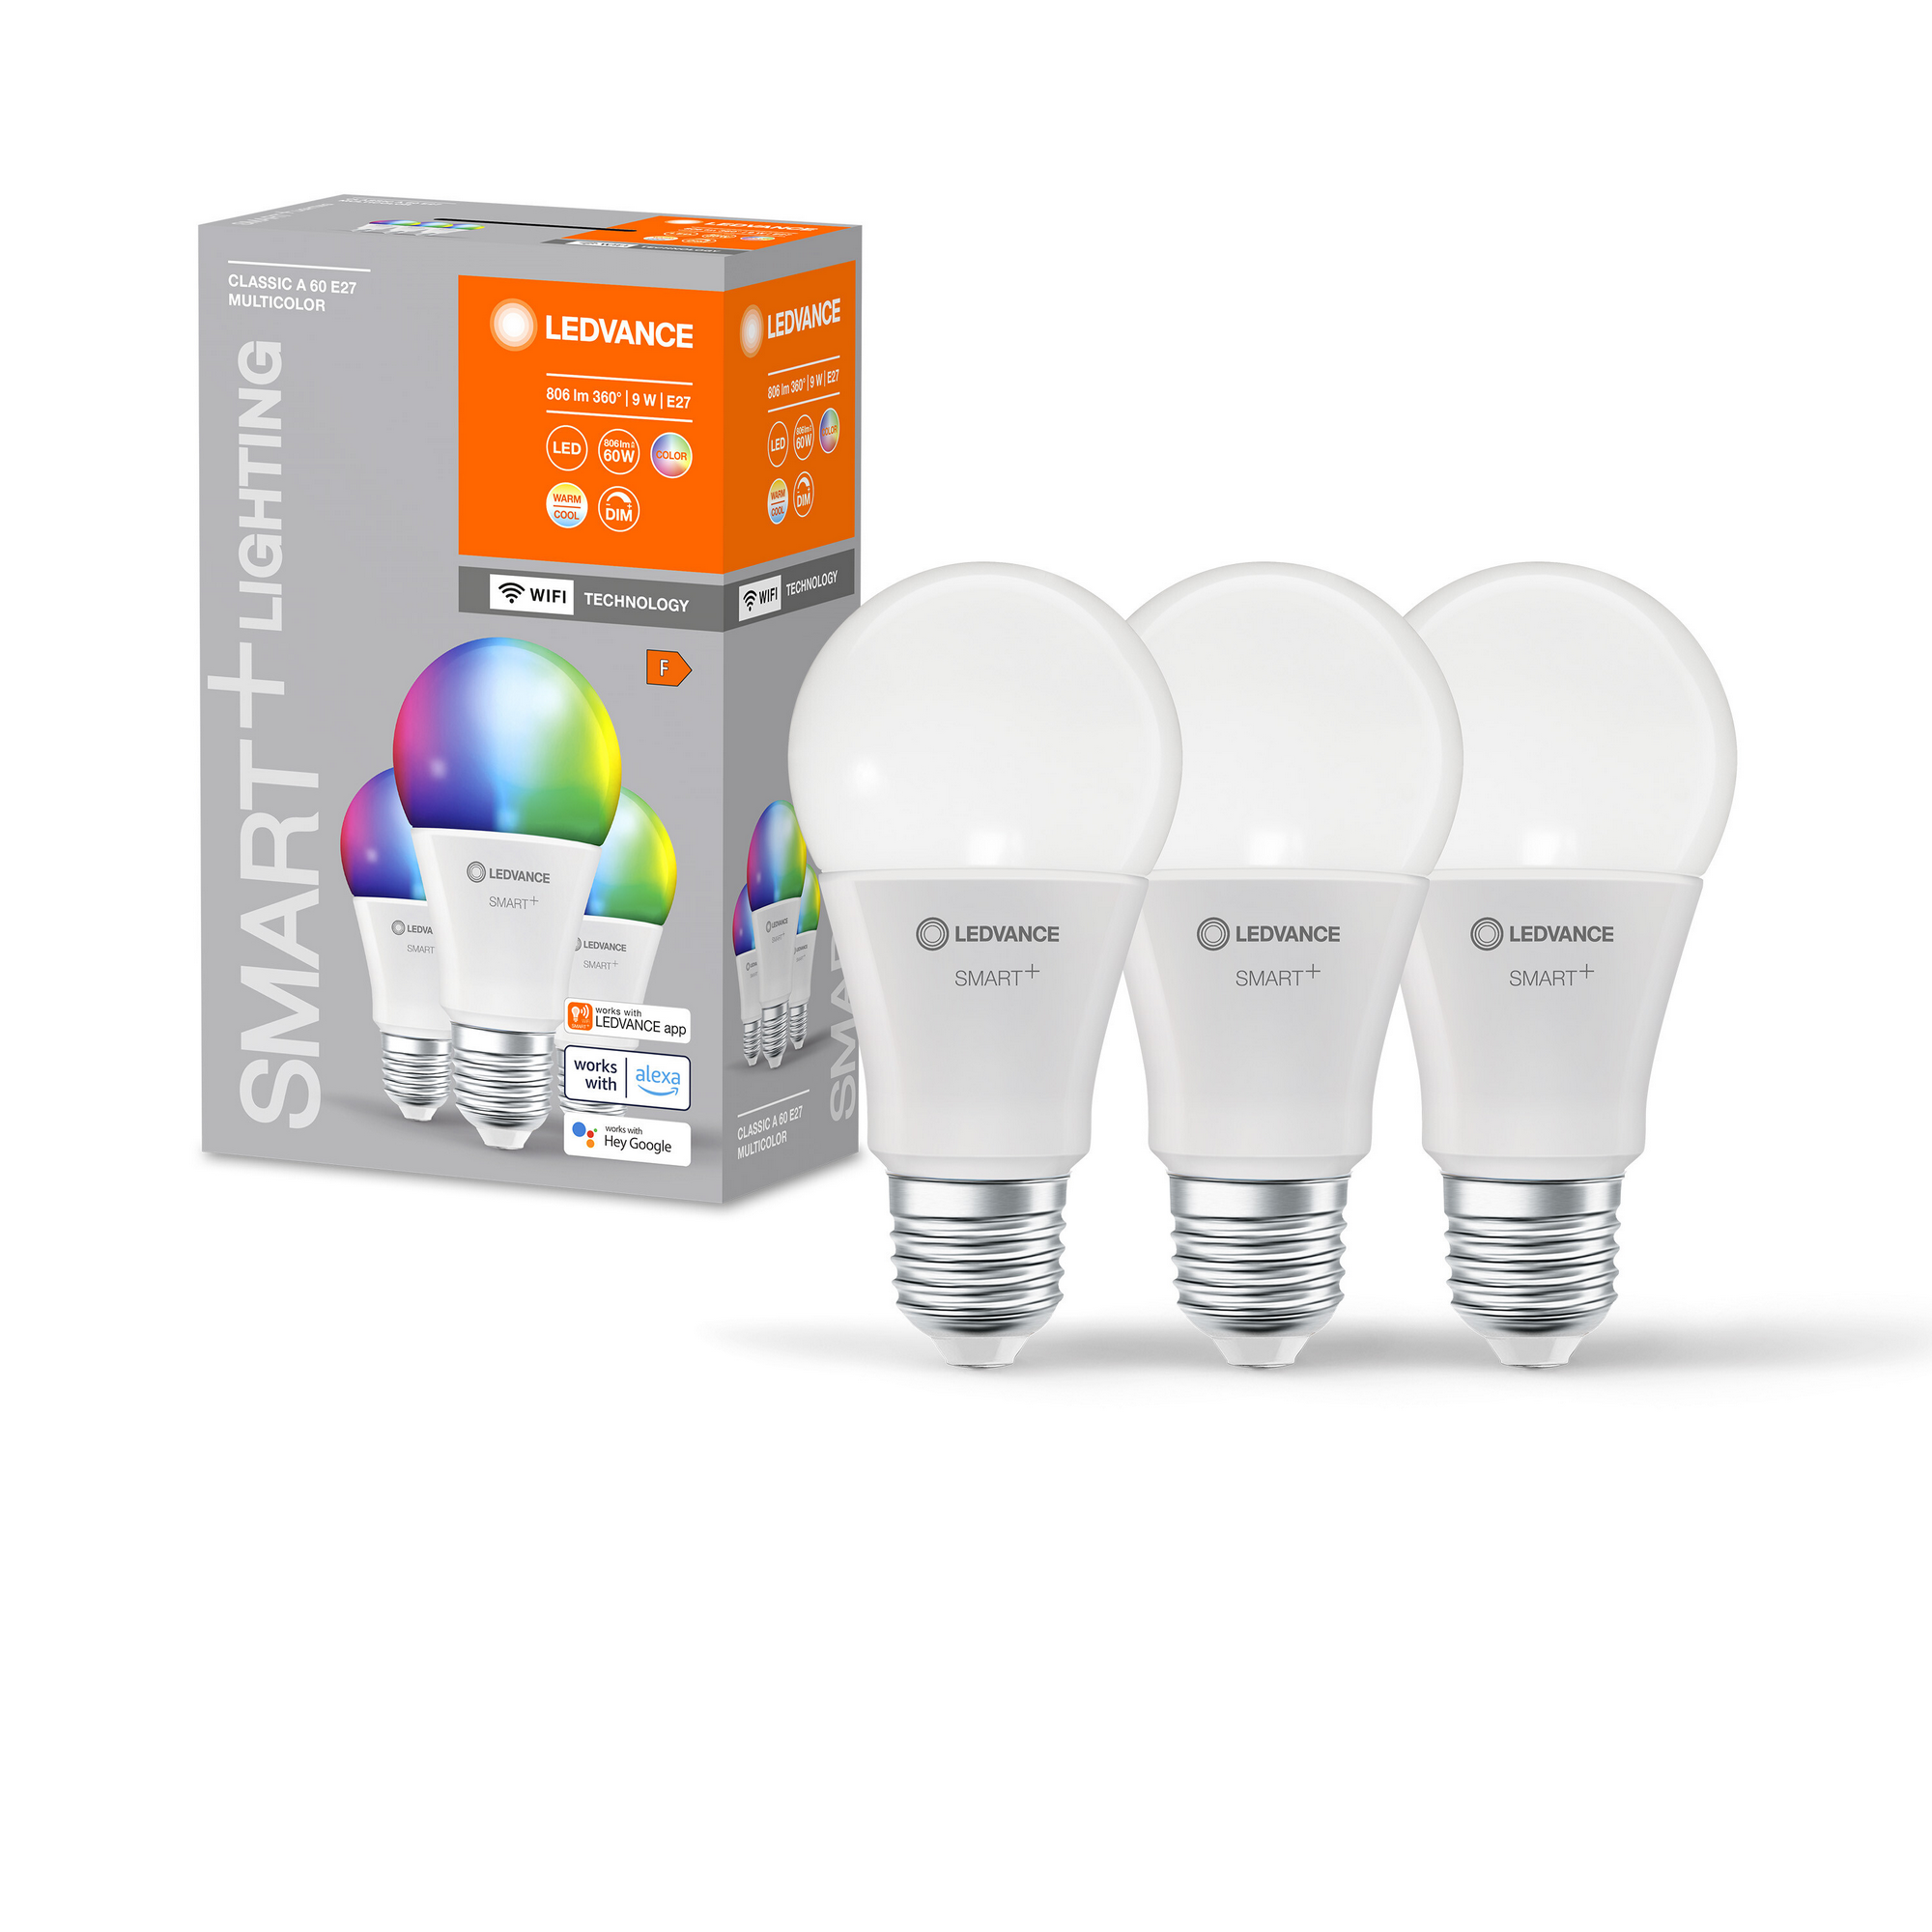 LED-Lampe 'Smart+ WiFi CLA' RGBW 9 W E27 806 lm, dimmbar 3er-Pack + product picture